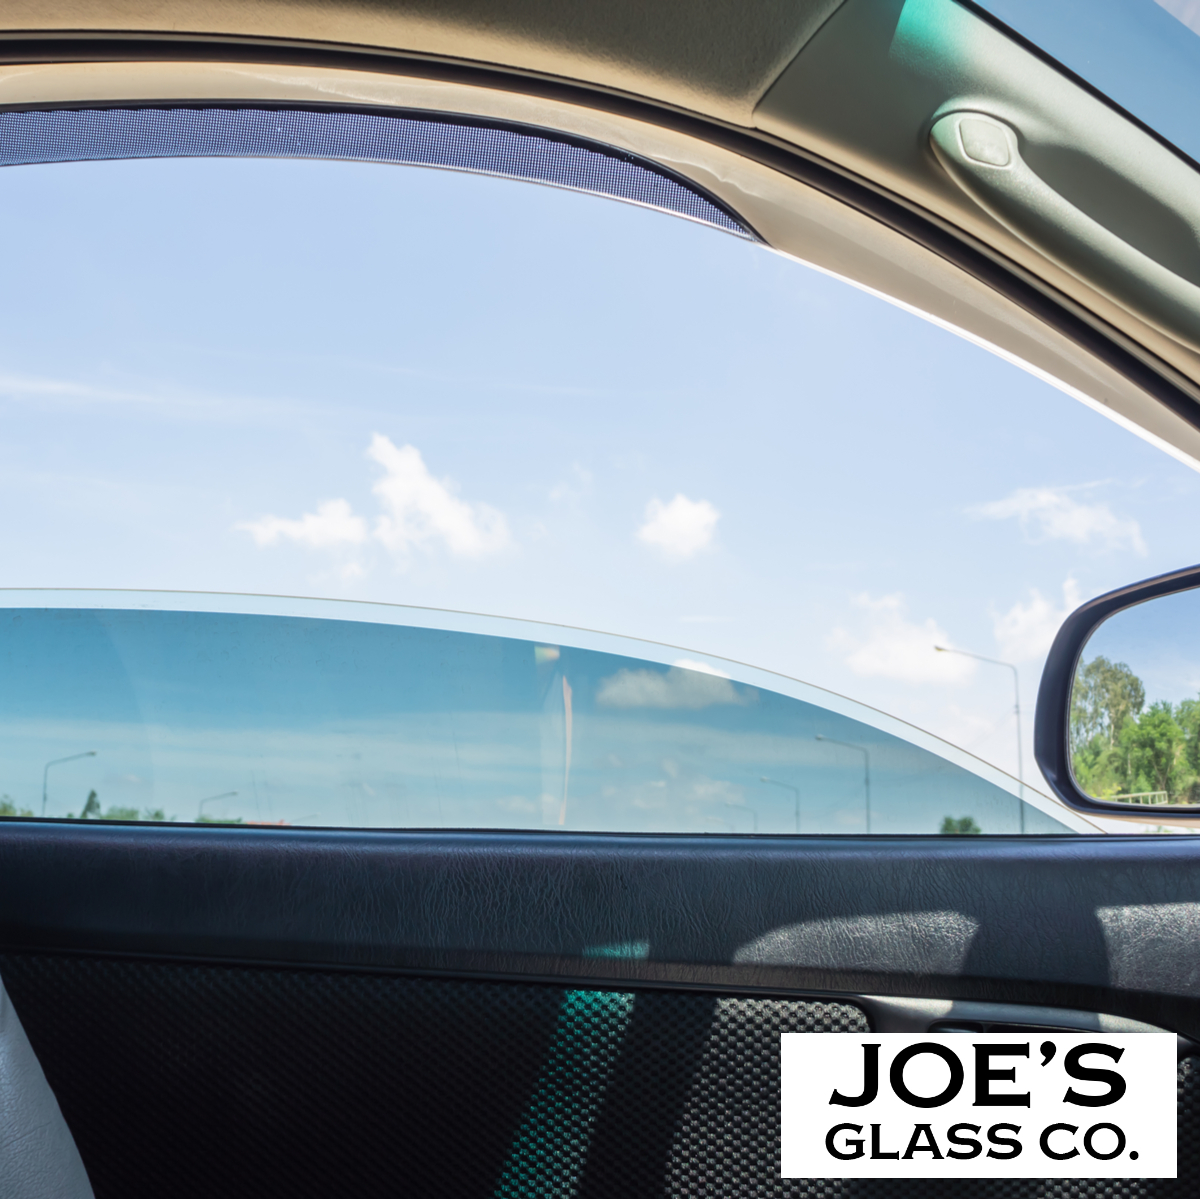 We Are Your Go-To for Auto Door Glass Installations and Other Automotive Glass Services